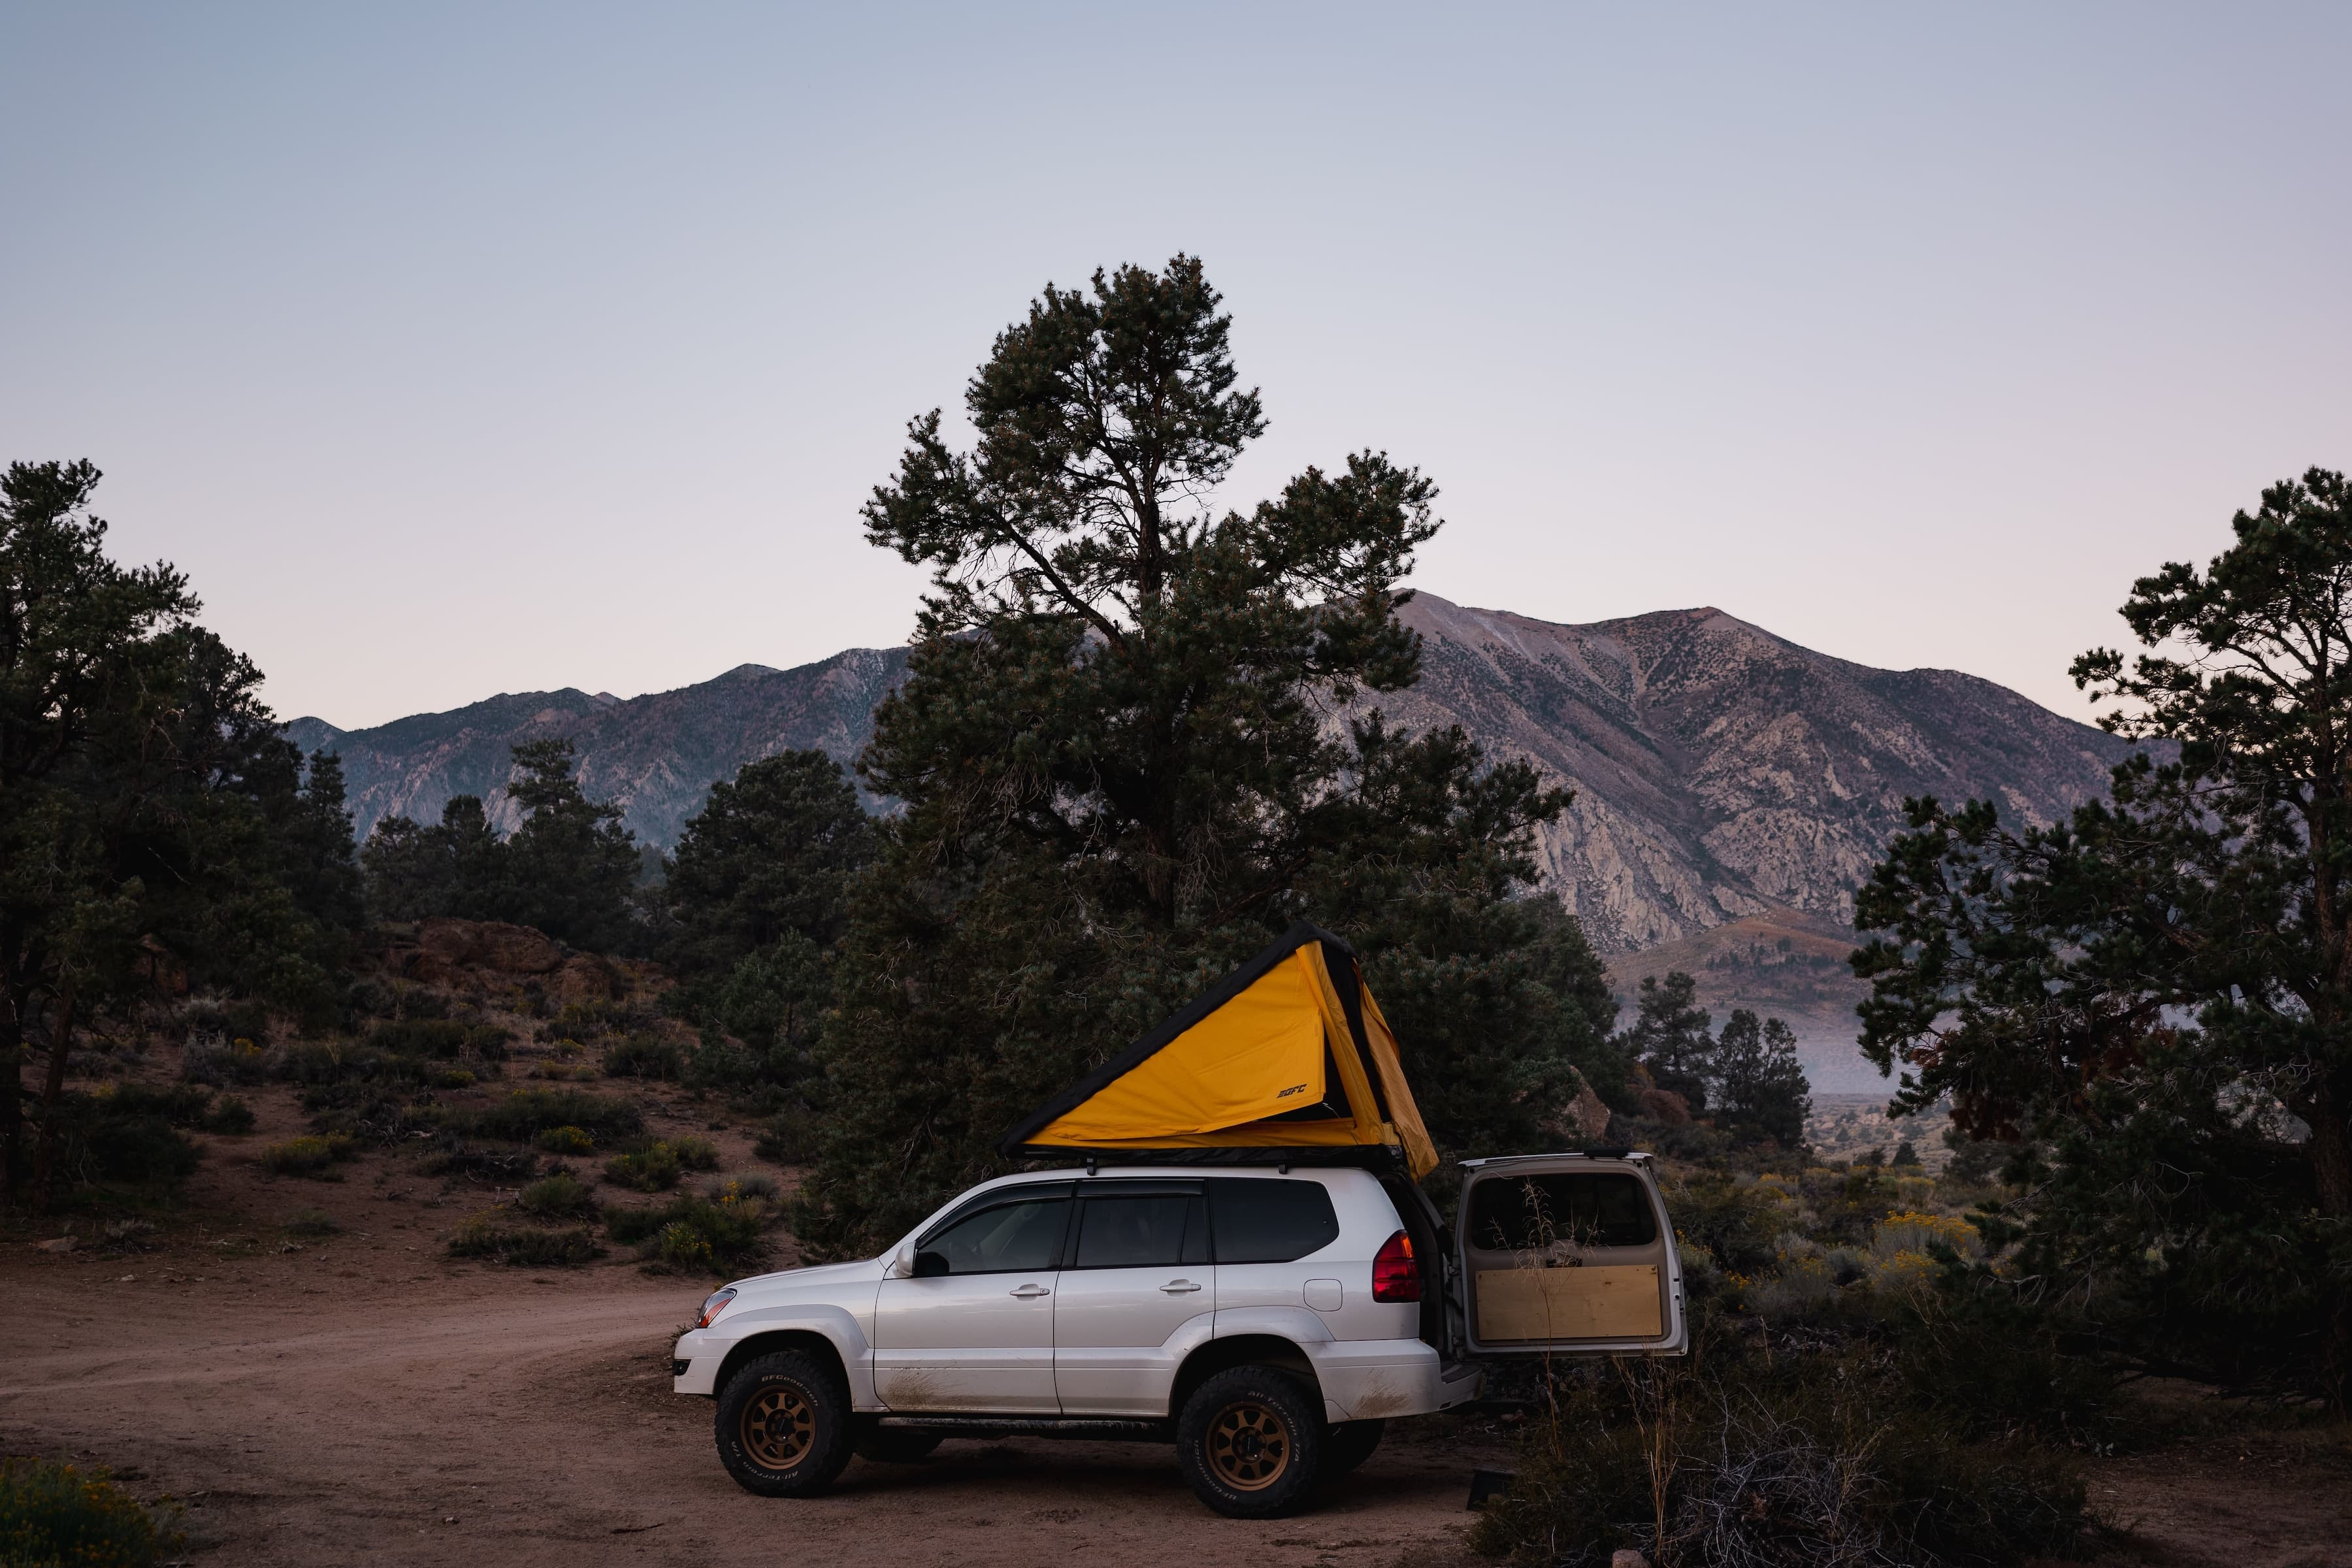 A white SUV with an open rooftop tent parked in a natural setting with pine trees and a mountainous background during morning that looks like dusk.